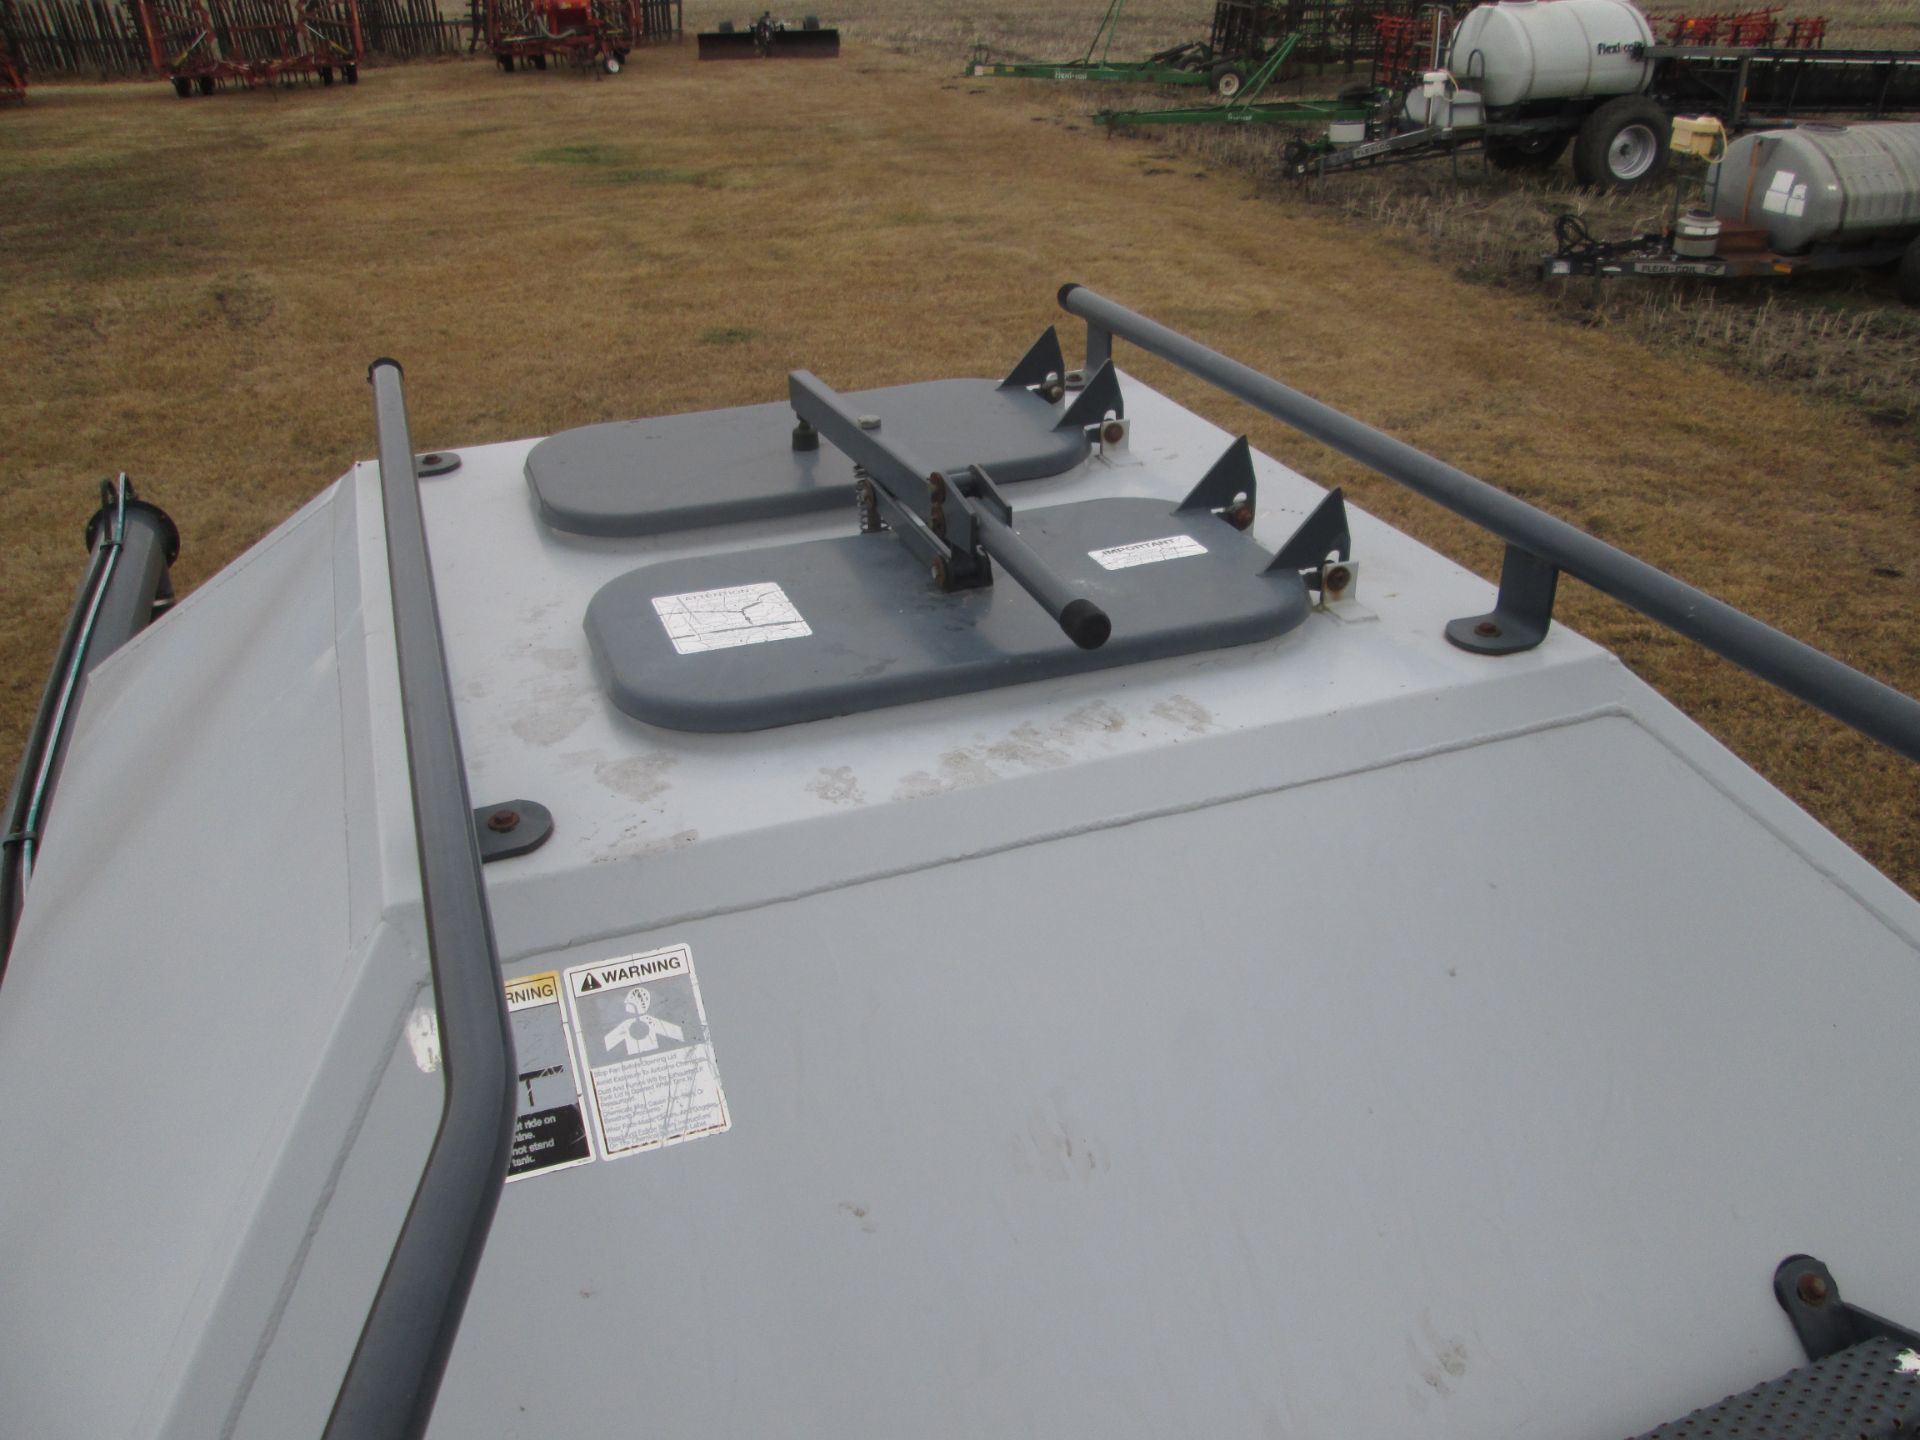 Flexicoil 2320 TBH air tank, 2 new meter boxes in 2014, SN U091666-99 - Image 13 of 13